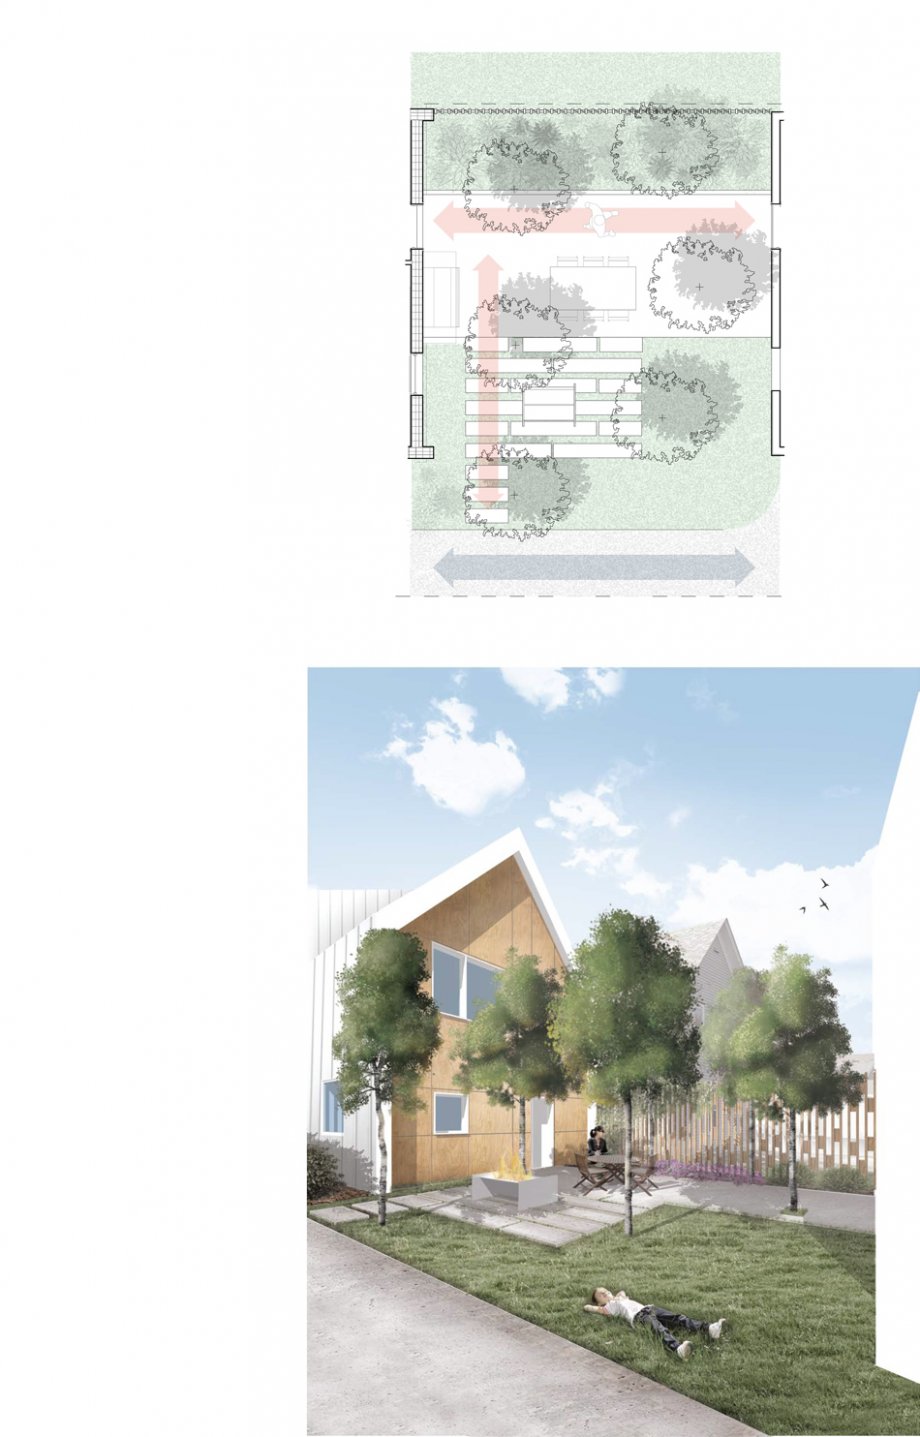 The design for the courtyard between the main house and garage.